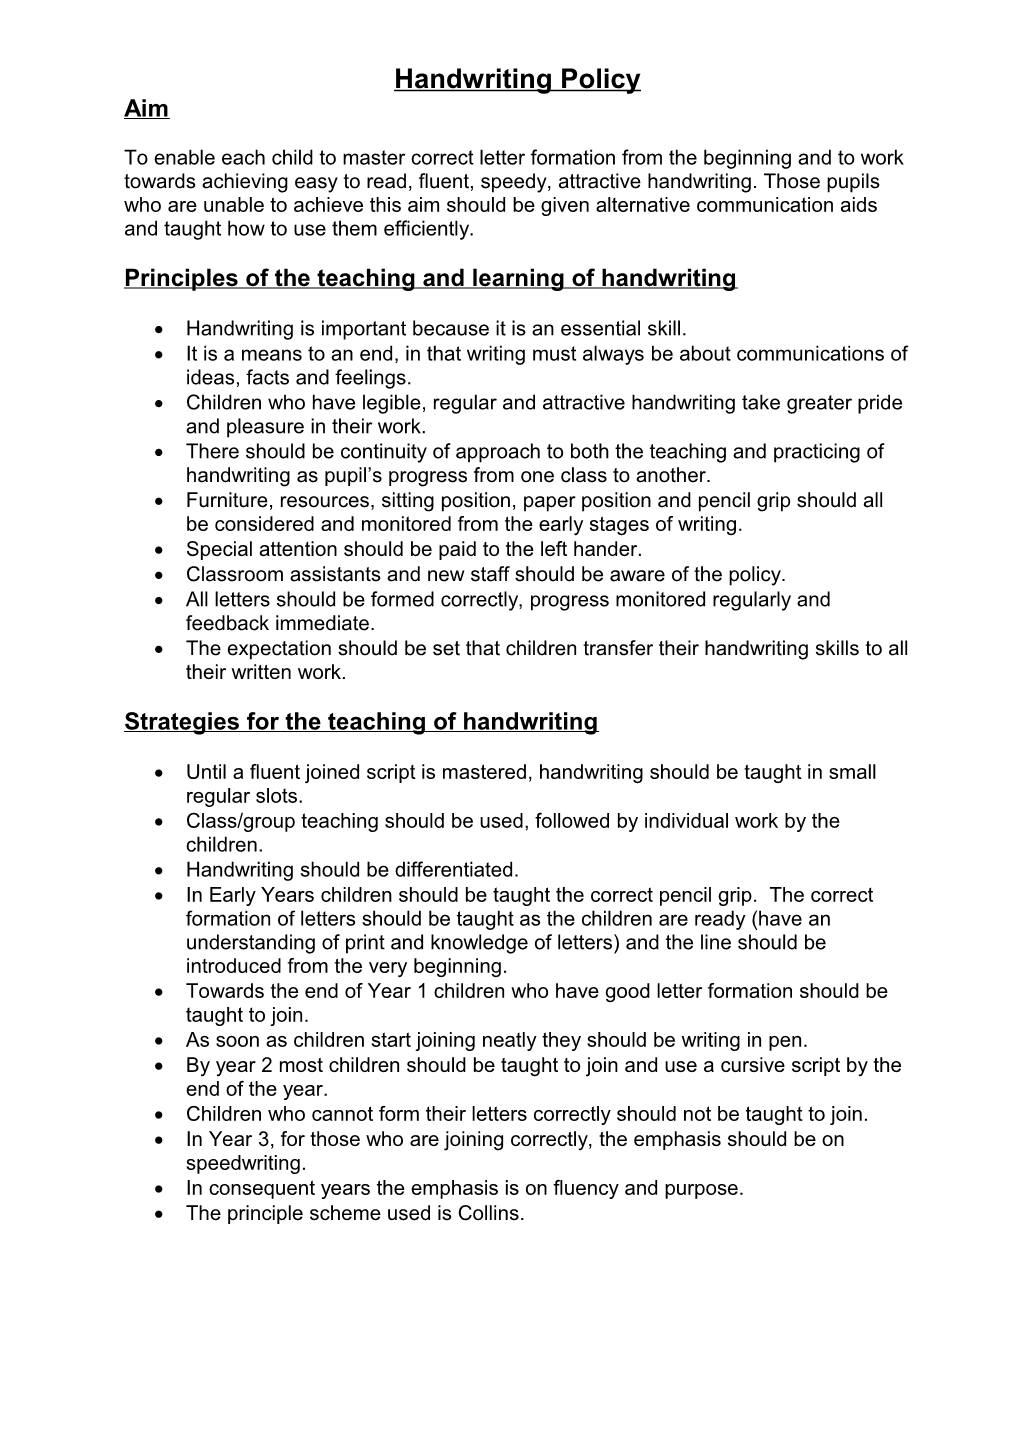 Principles of the Teaching and Learning of Handwriting